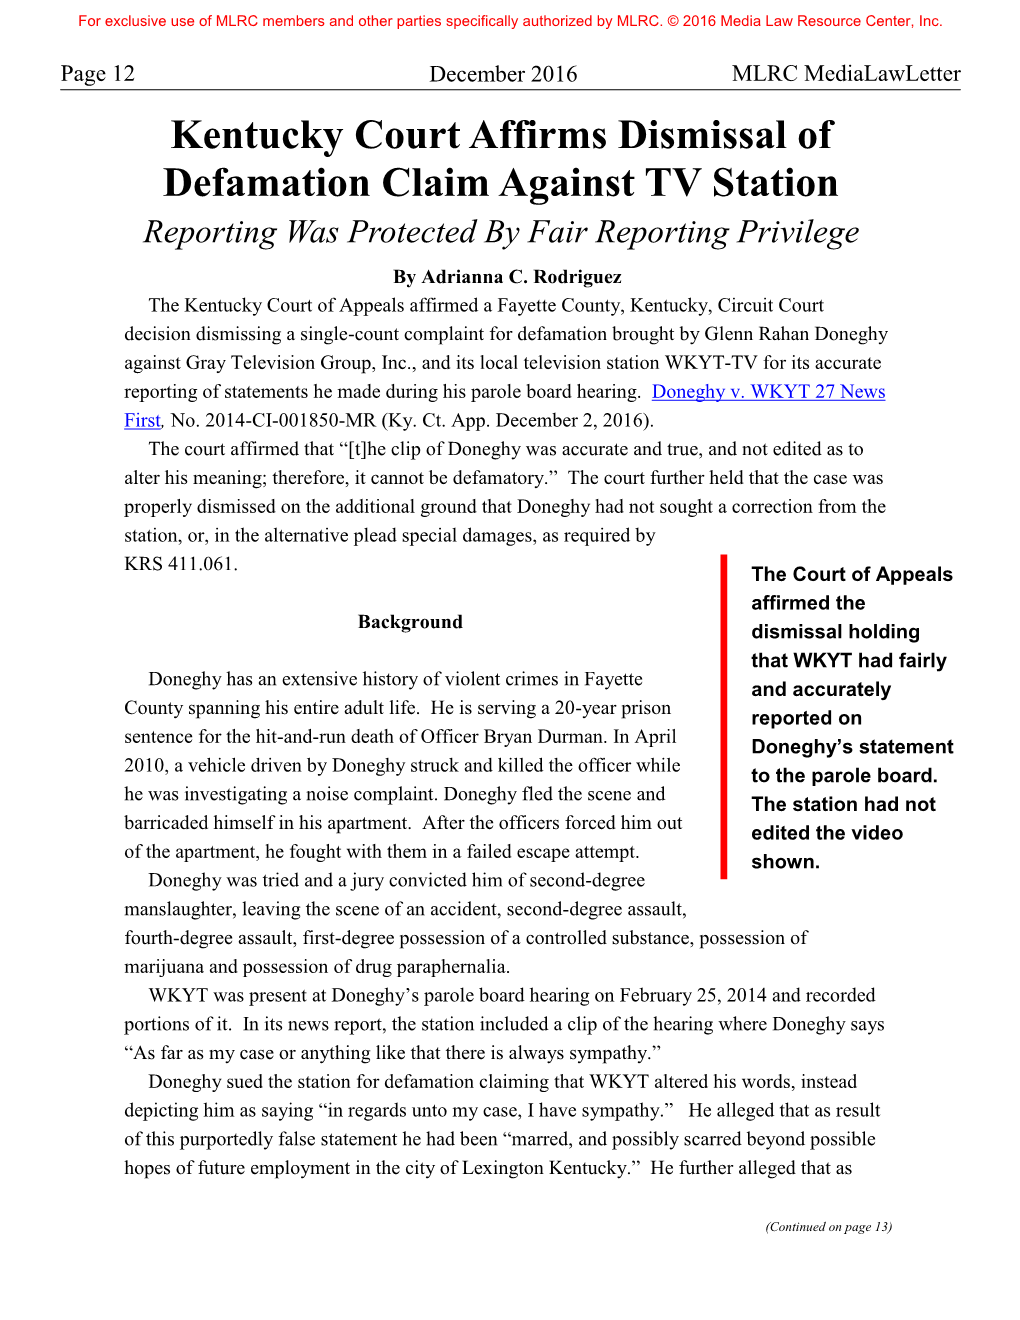 Kentucky Court Affirms Dismissal of Defamation Claim Against TV Station Reporting Was Protected by Fair Reporting Privilege by Adrianna C